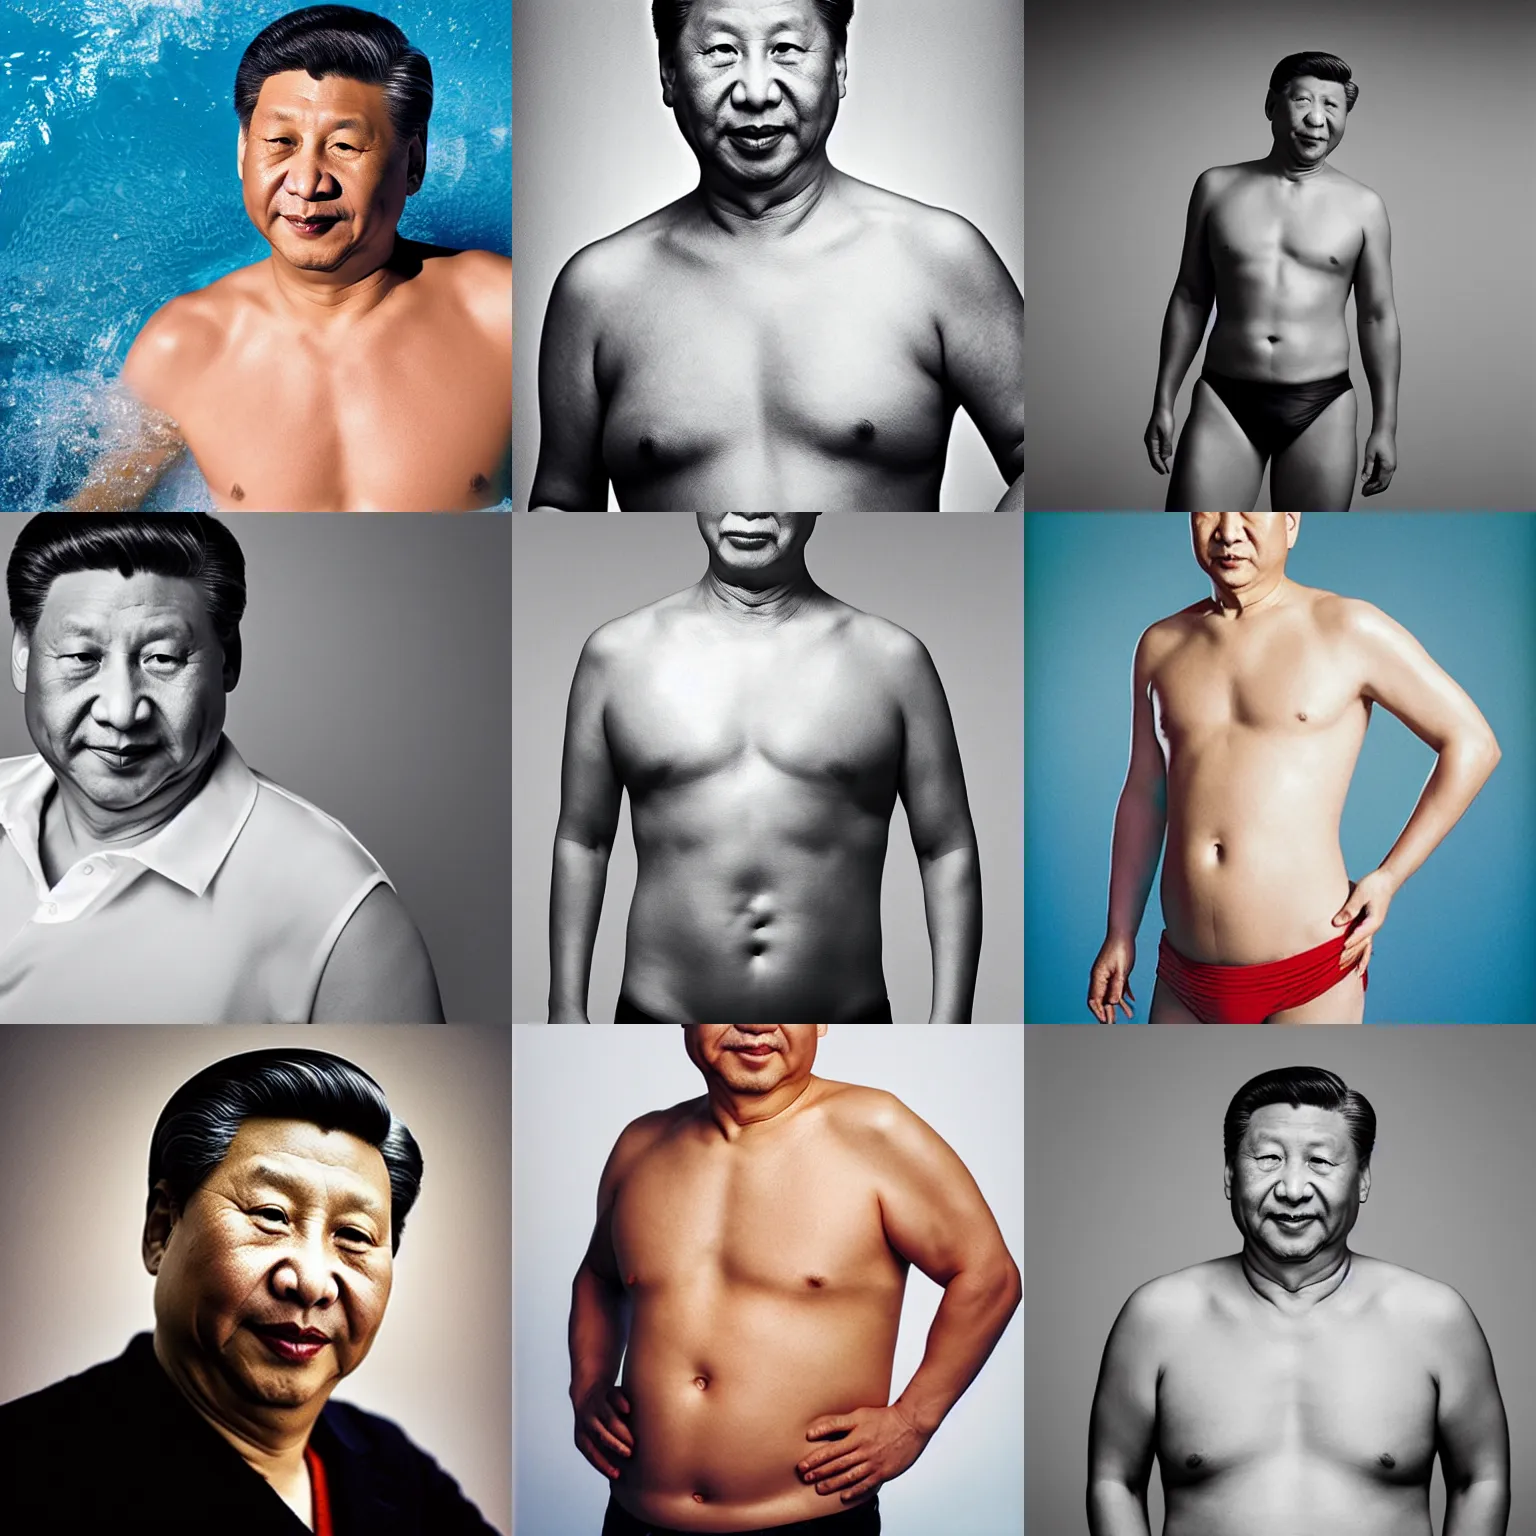 Prompt: Photo of Xi Jinping in swimsuit, soft studio lighting, photo taken by Martin Schoeller for Abercrombie and Fitch, award-winning photo, 24mm f/1.4